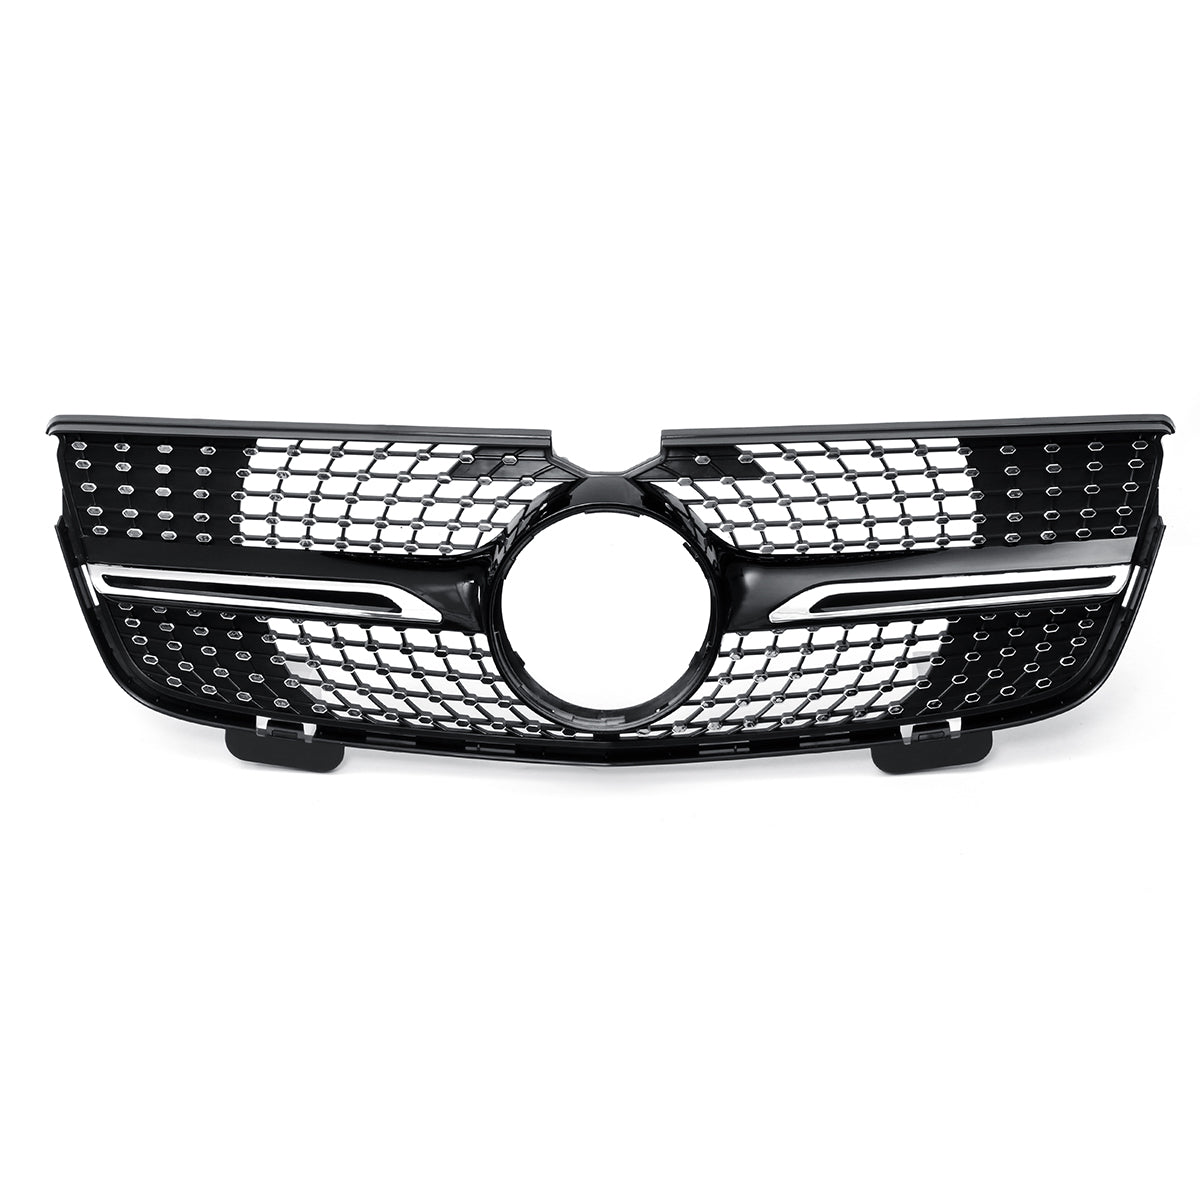 White Smoke Black Diamond Style Front Grille Grill For Mercedes-Benz GL-Class X164 GL320/350/450